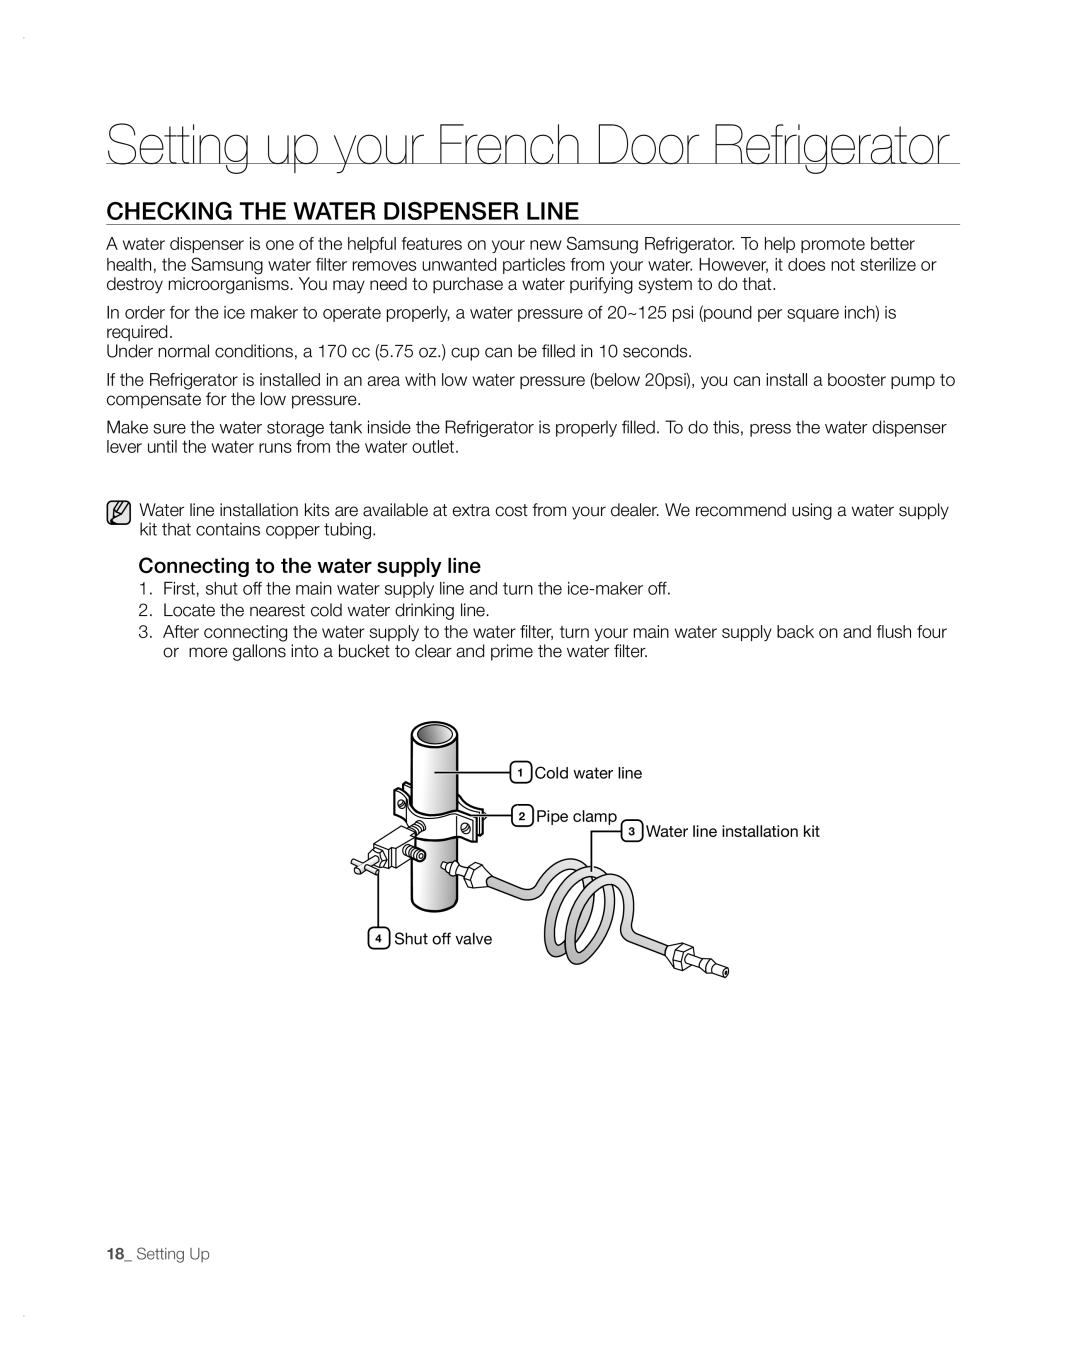 Samsung RFG297AA user manual CHECKinG tHE wAtER DisPEnsER LinE, Setting up your French Door Refrigerator 